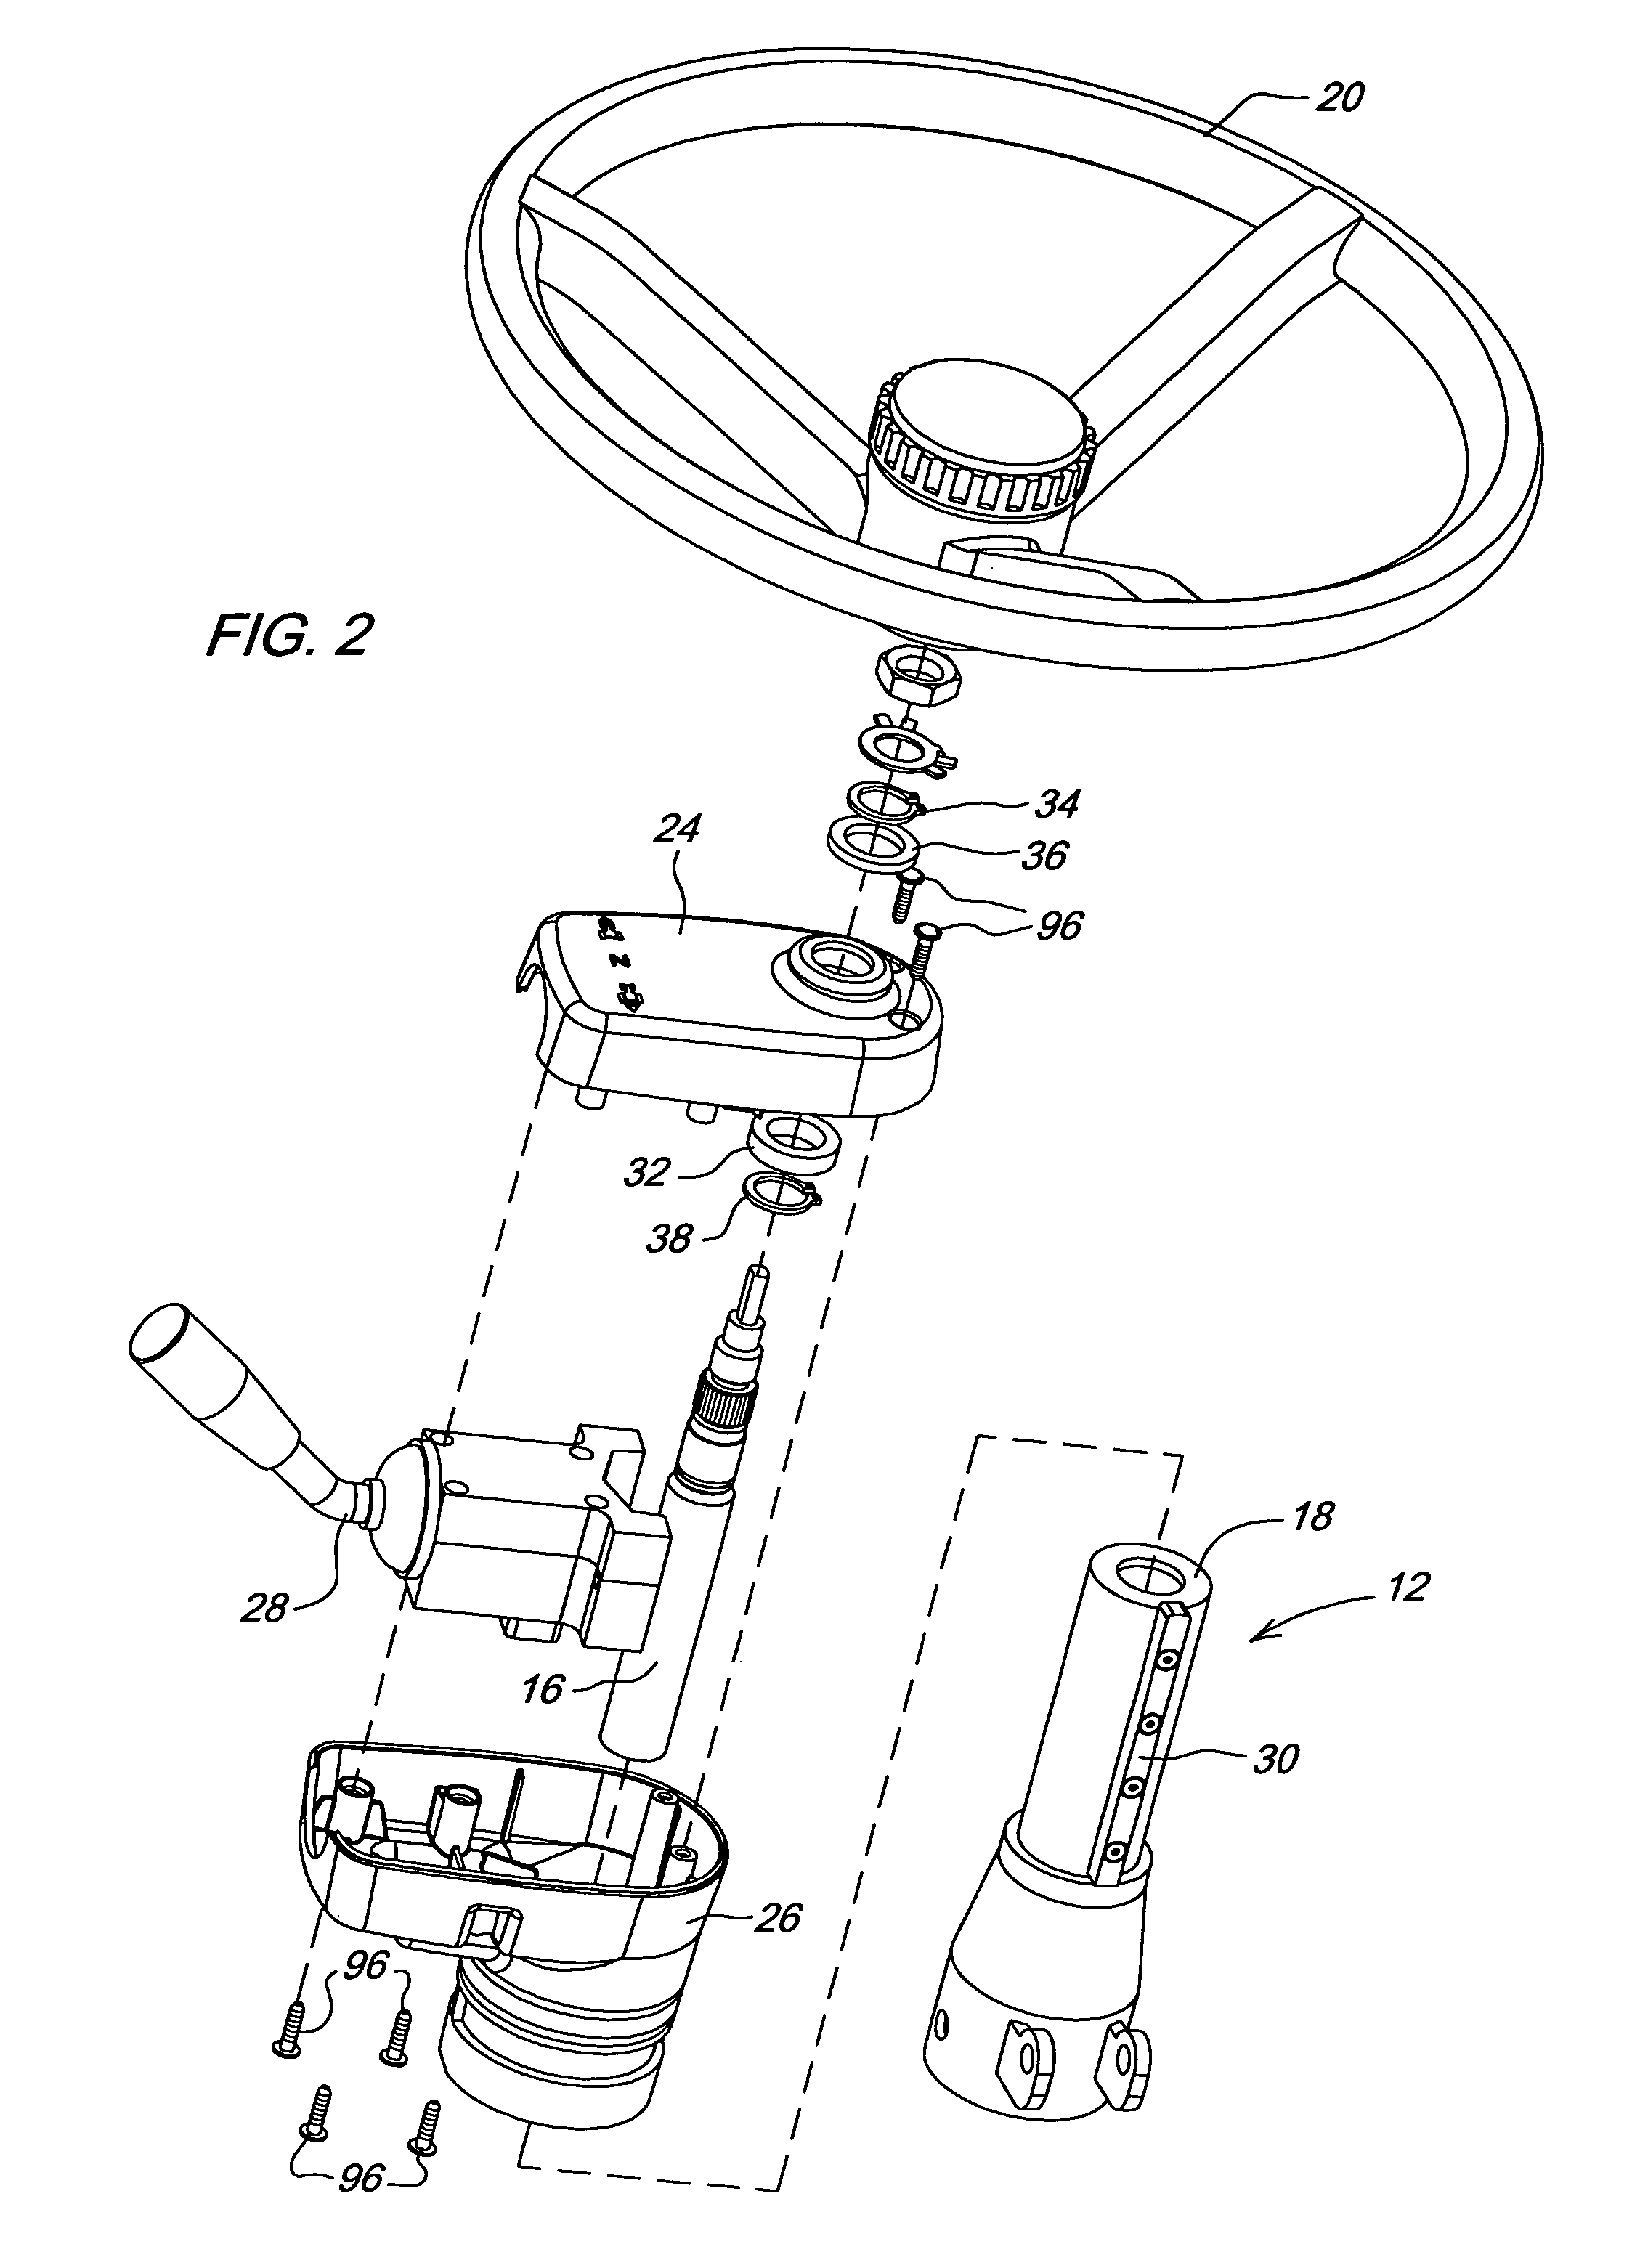 Control housing for work vehicle